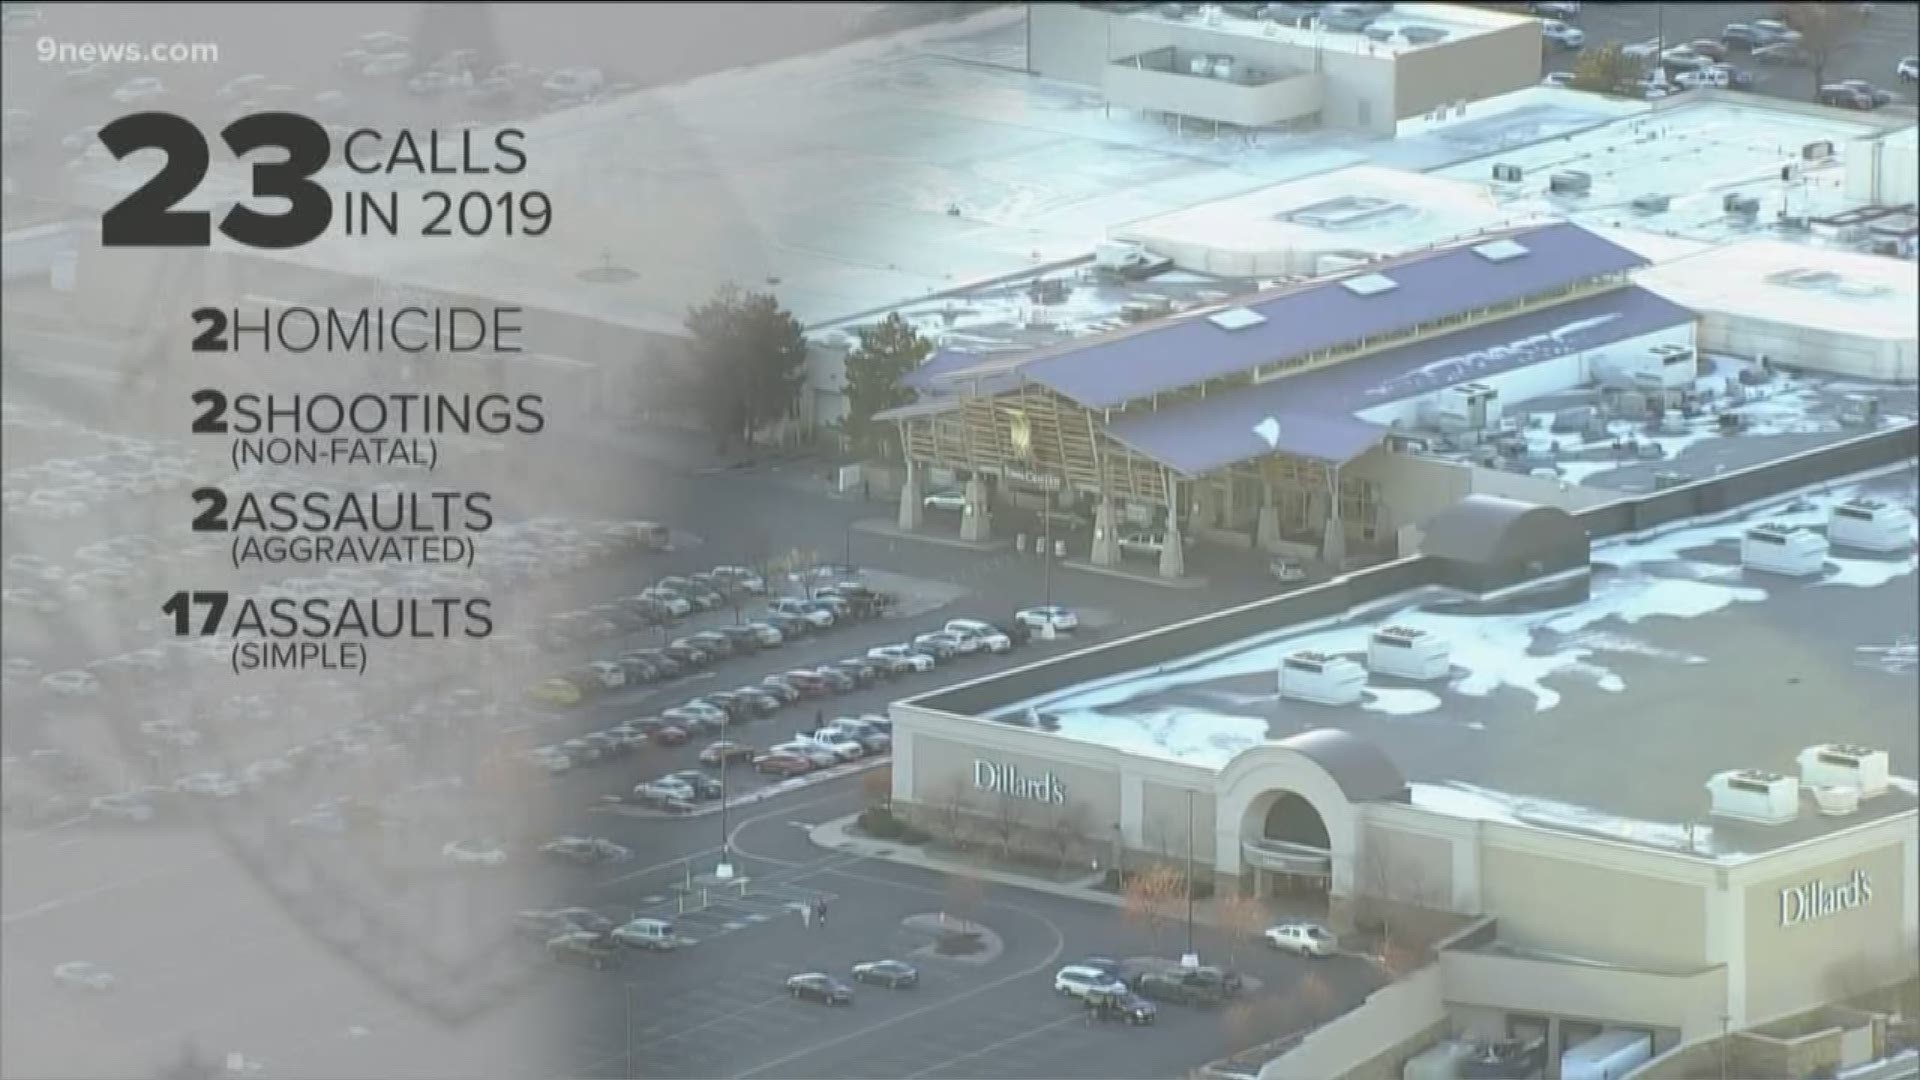 Police called to Aurora Mall 23 times in 2019